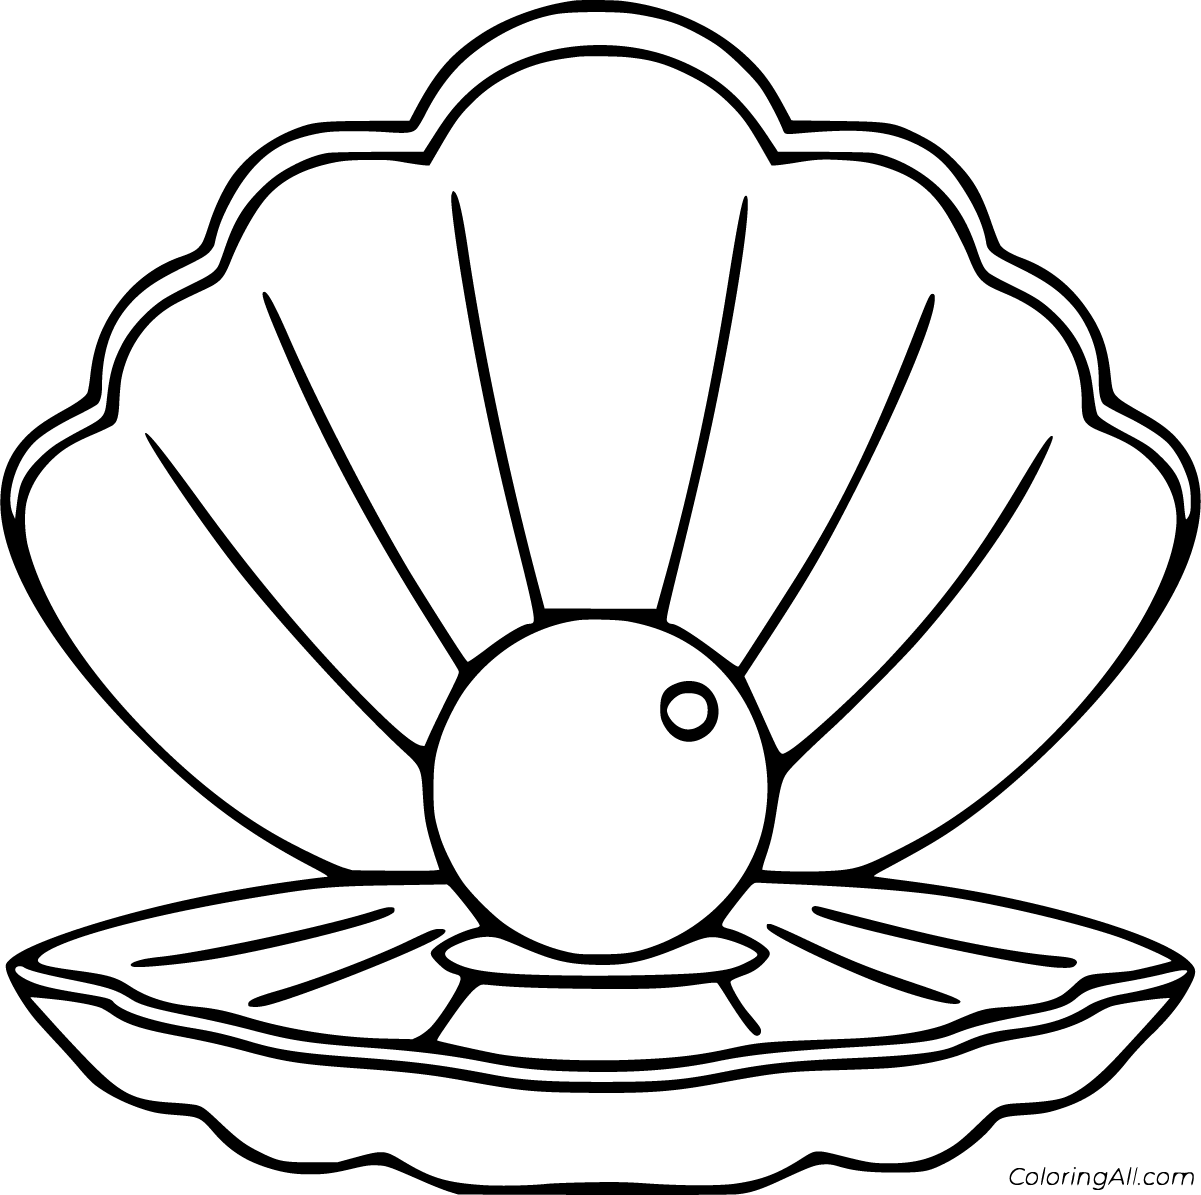 Download Scallop Coloring Pages - ColoringAll